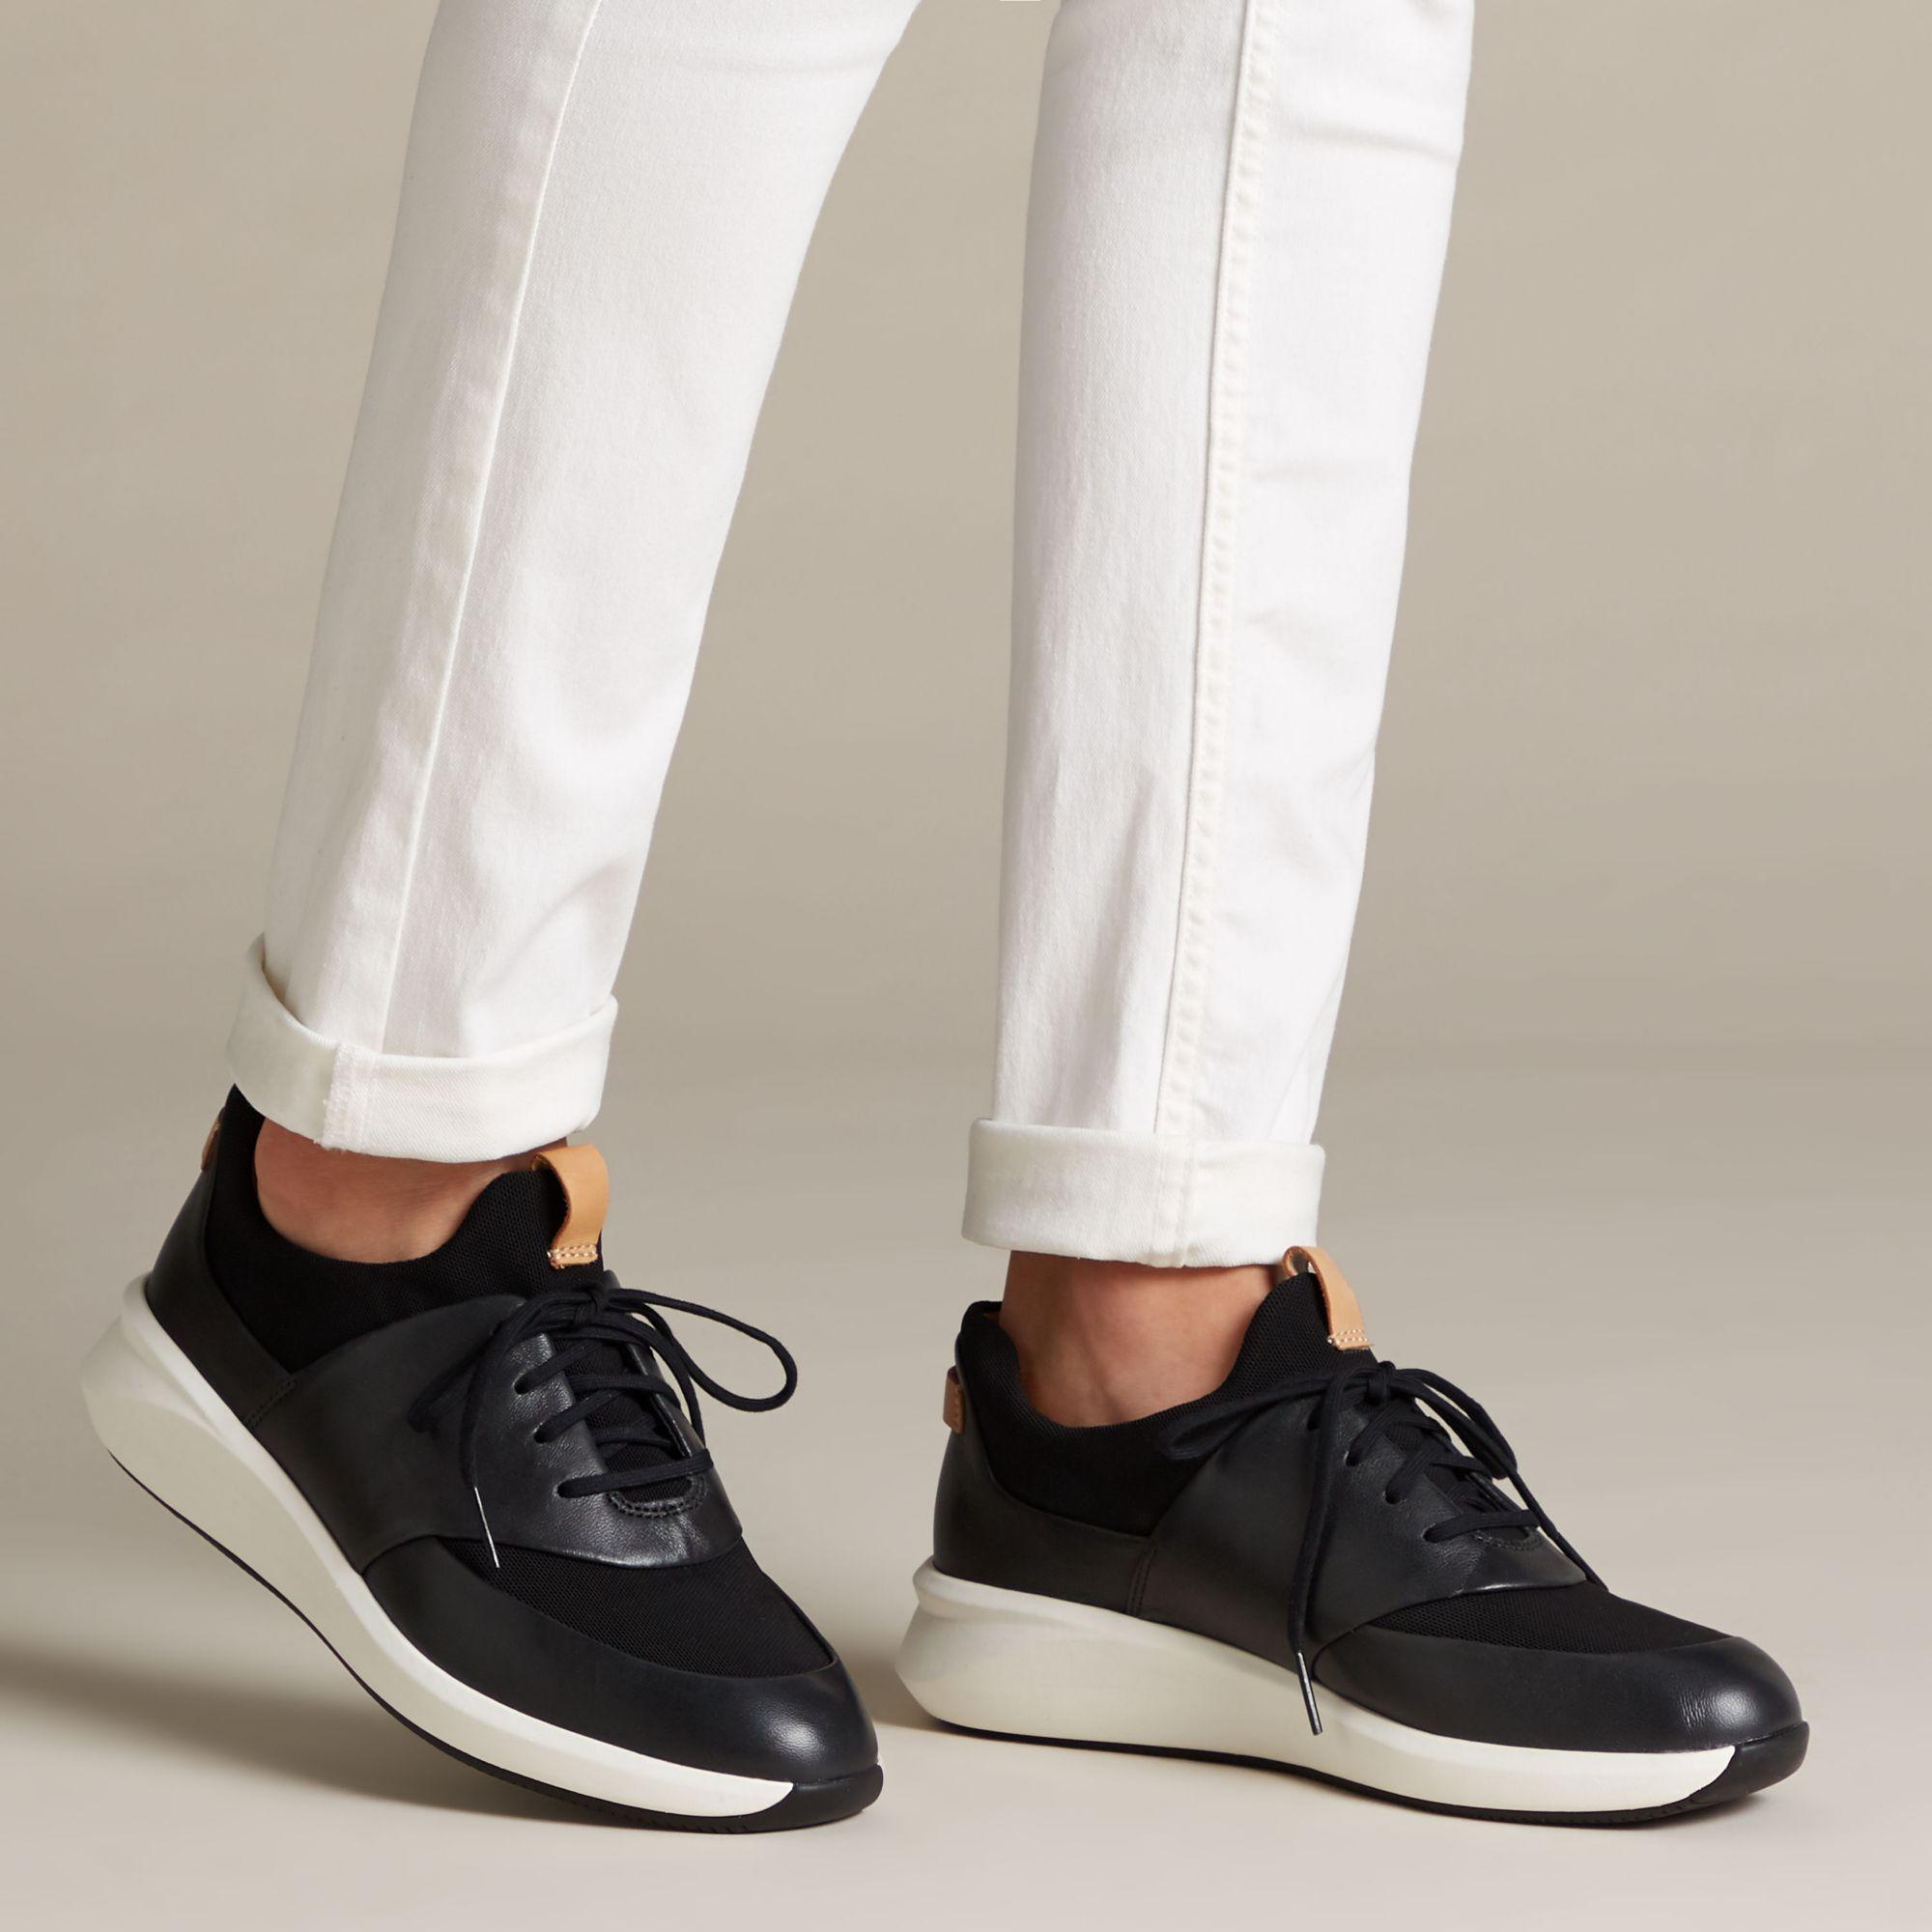 Clarks Un Rio Lace Womens Sports Trainers in Black Leather (Black) | Lyst